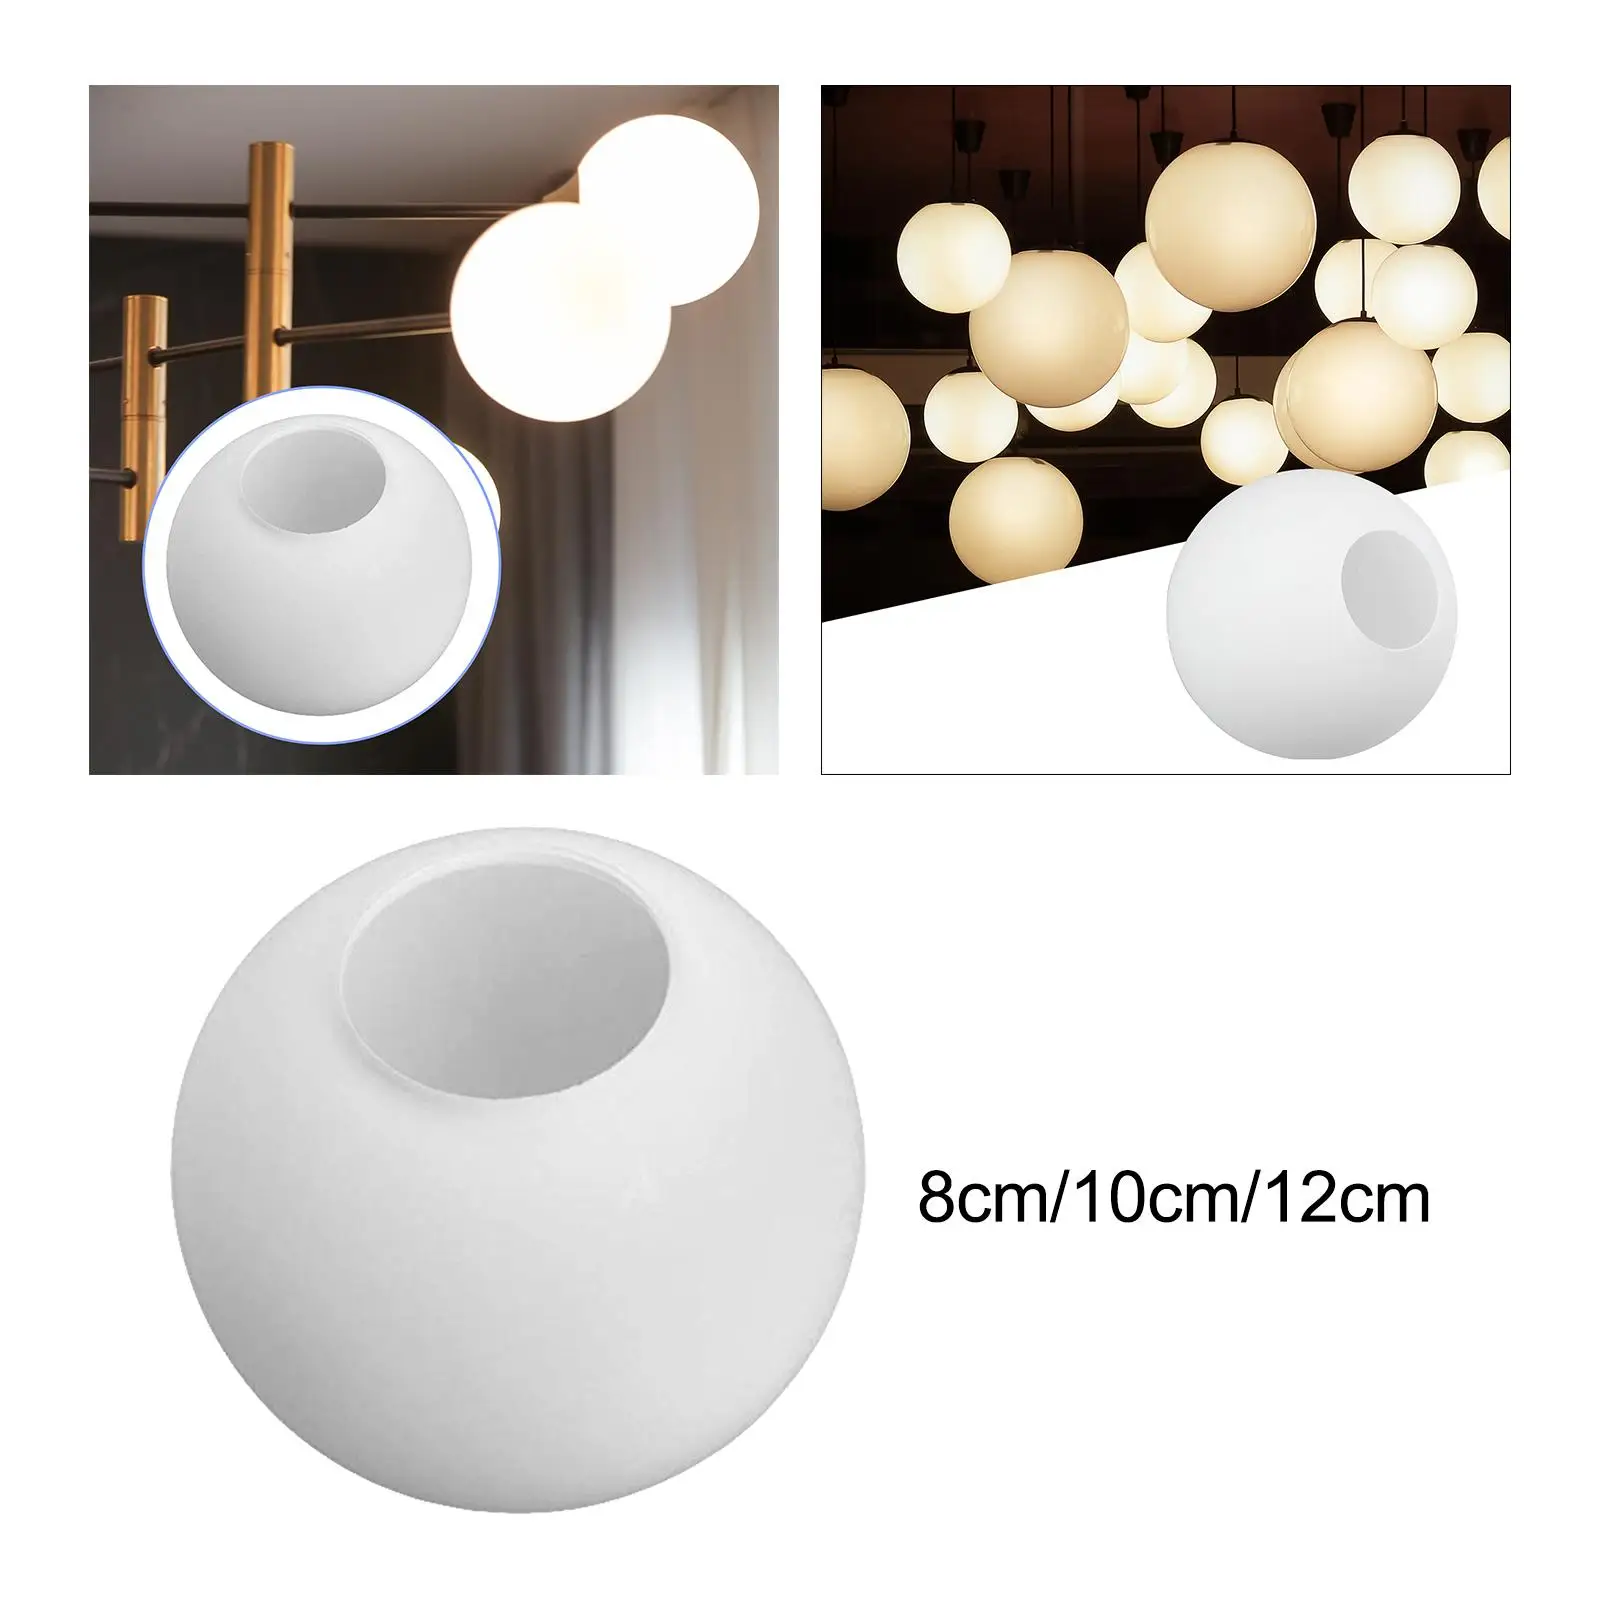 Frosted Globe Lamp Shades Chandelier Light Cover Fixture Cover Minimalist for Dining Room Decor Kitchen island Bedside